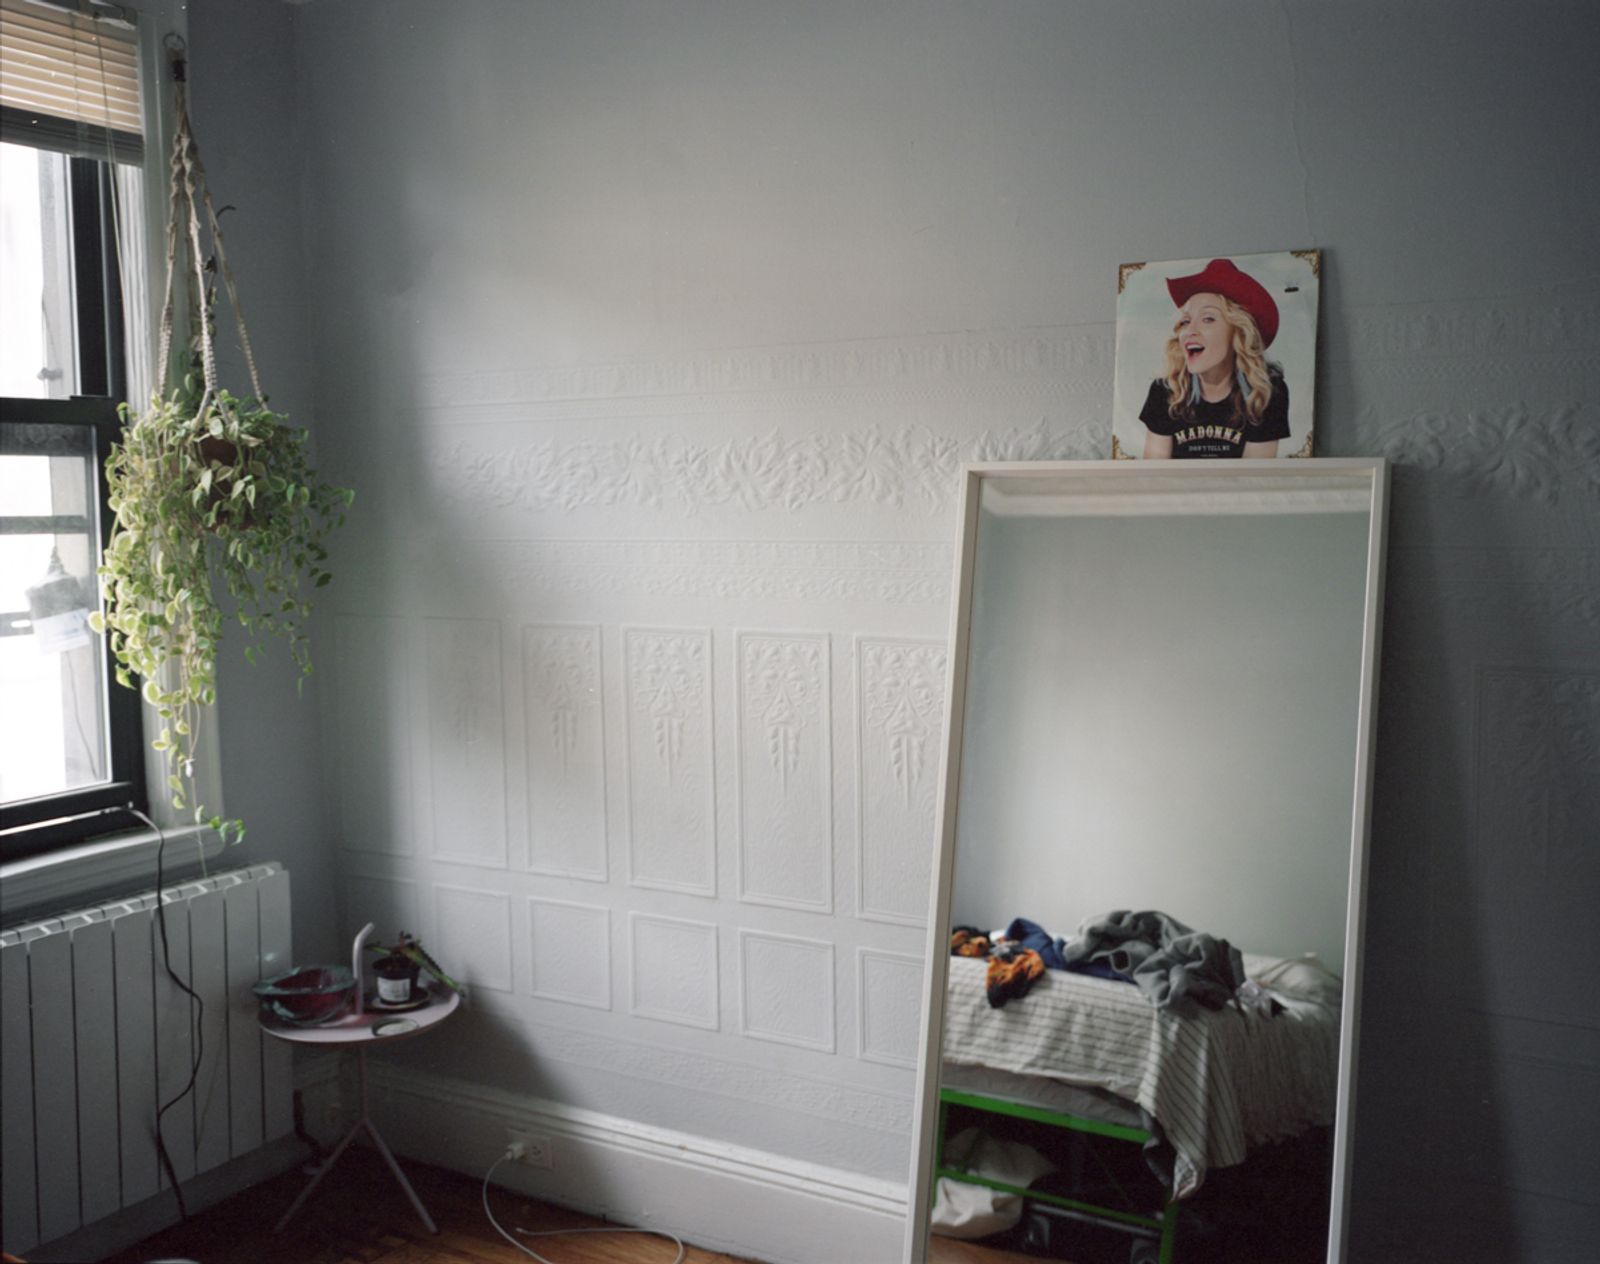 © Gili Benita - Eyal and Sam's, empty bedroom after they both went for a bike ride. Ridgewood, NYC, May 24th 2020